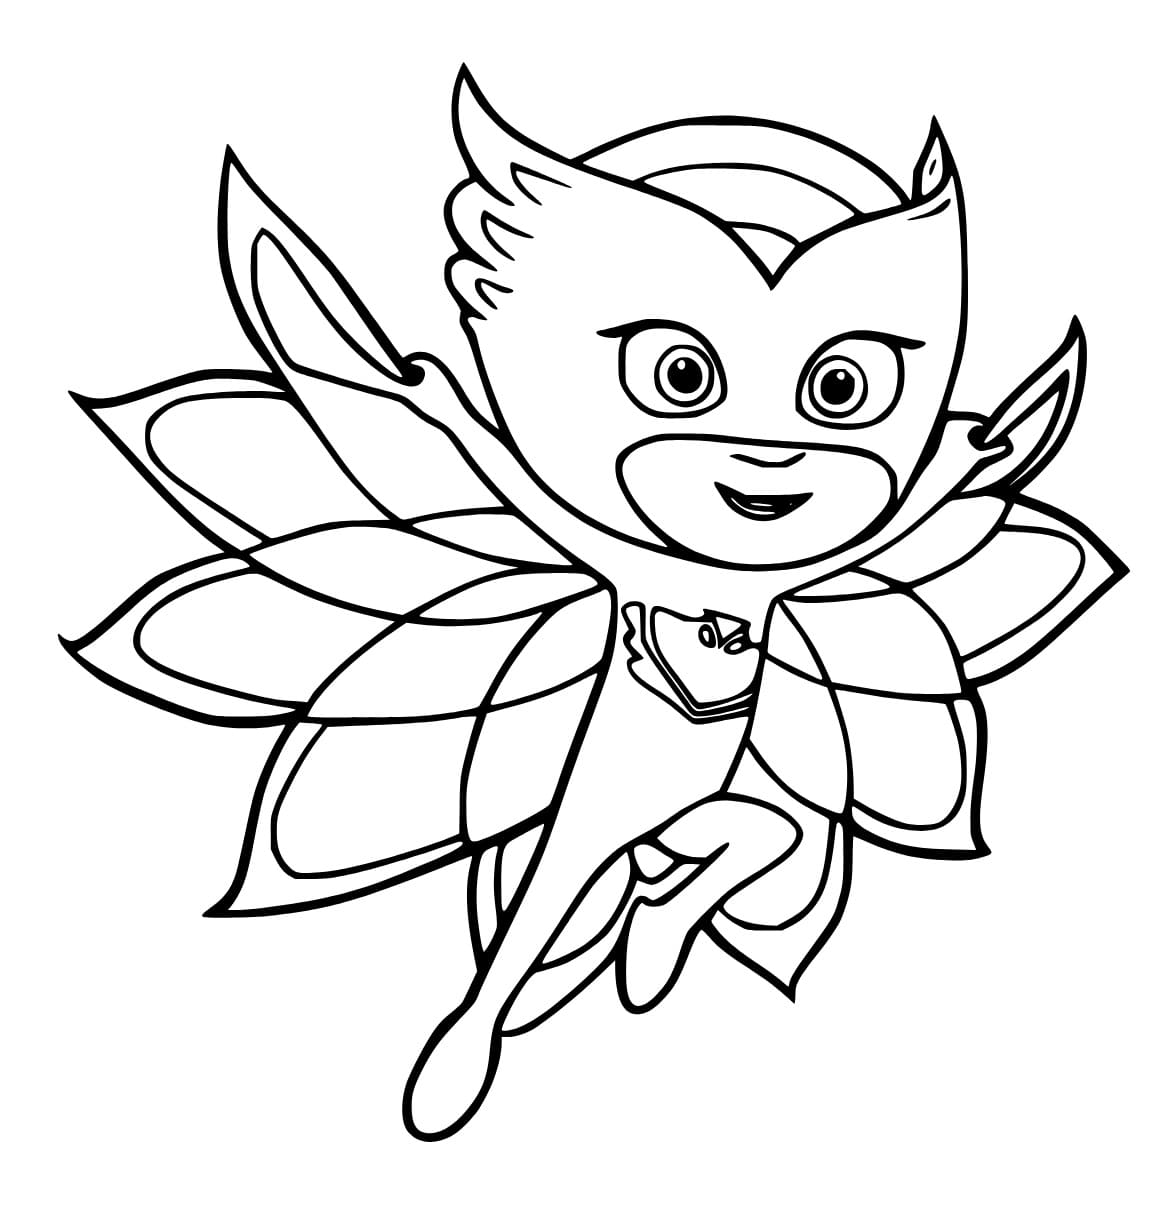 Flying owlette coloring page